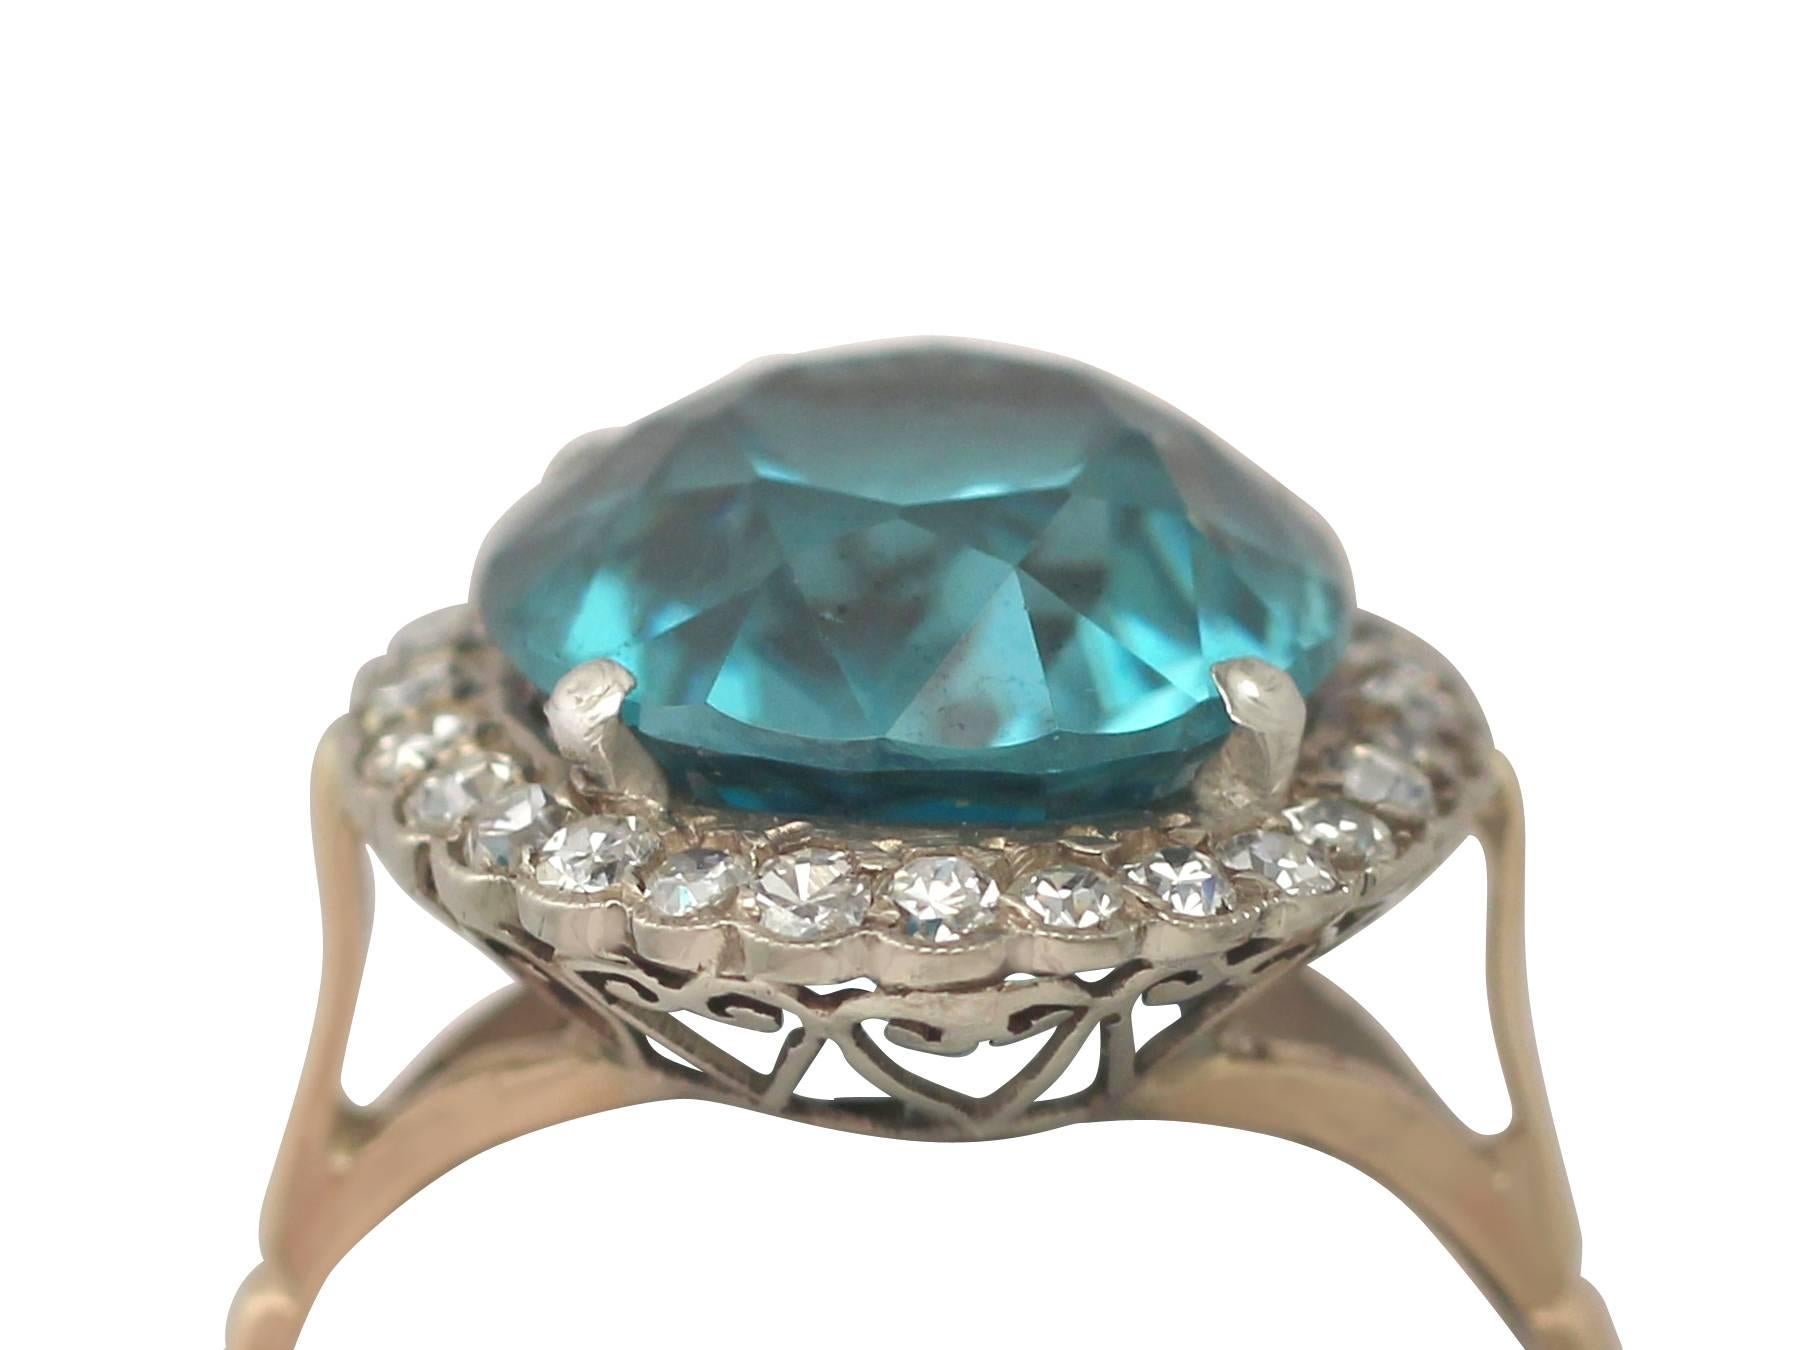 A stunning 17.39 carat high zircon and 0.76 carat diamond, 18 carat yellow gold and 18 carat white gold set cocktail ring; part of our diverse antique jewellery collections.

This stunning, fine and impressive antique zircon ring has been crafted in